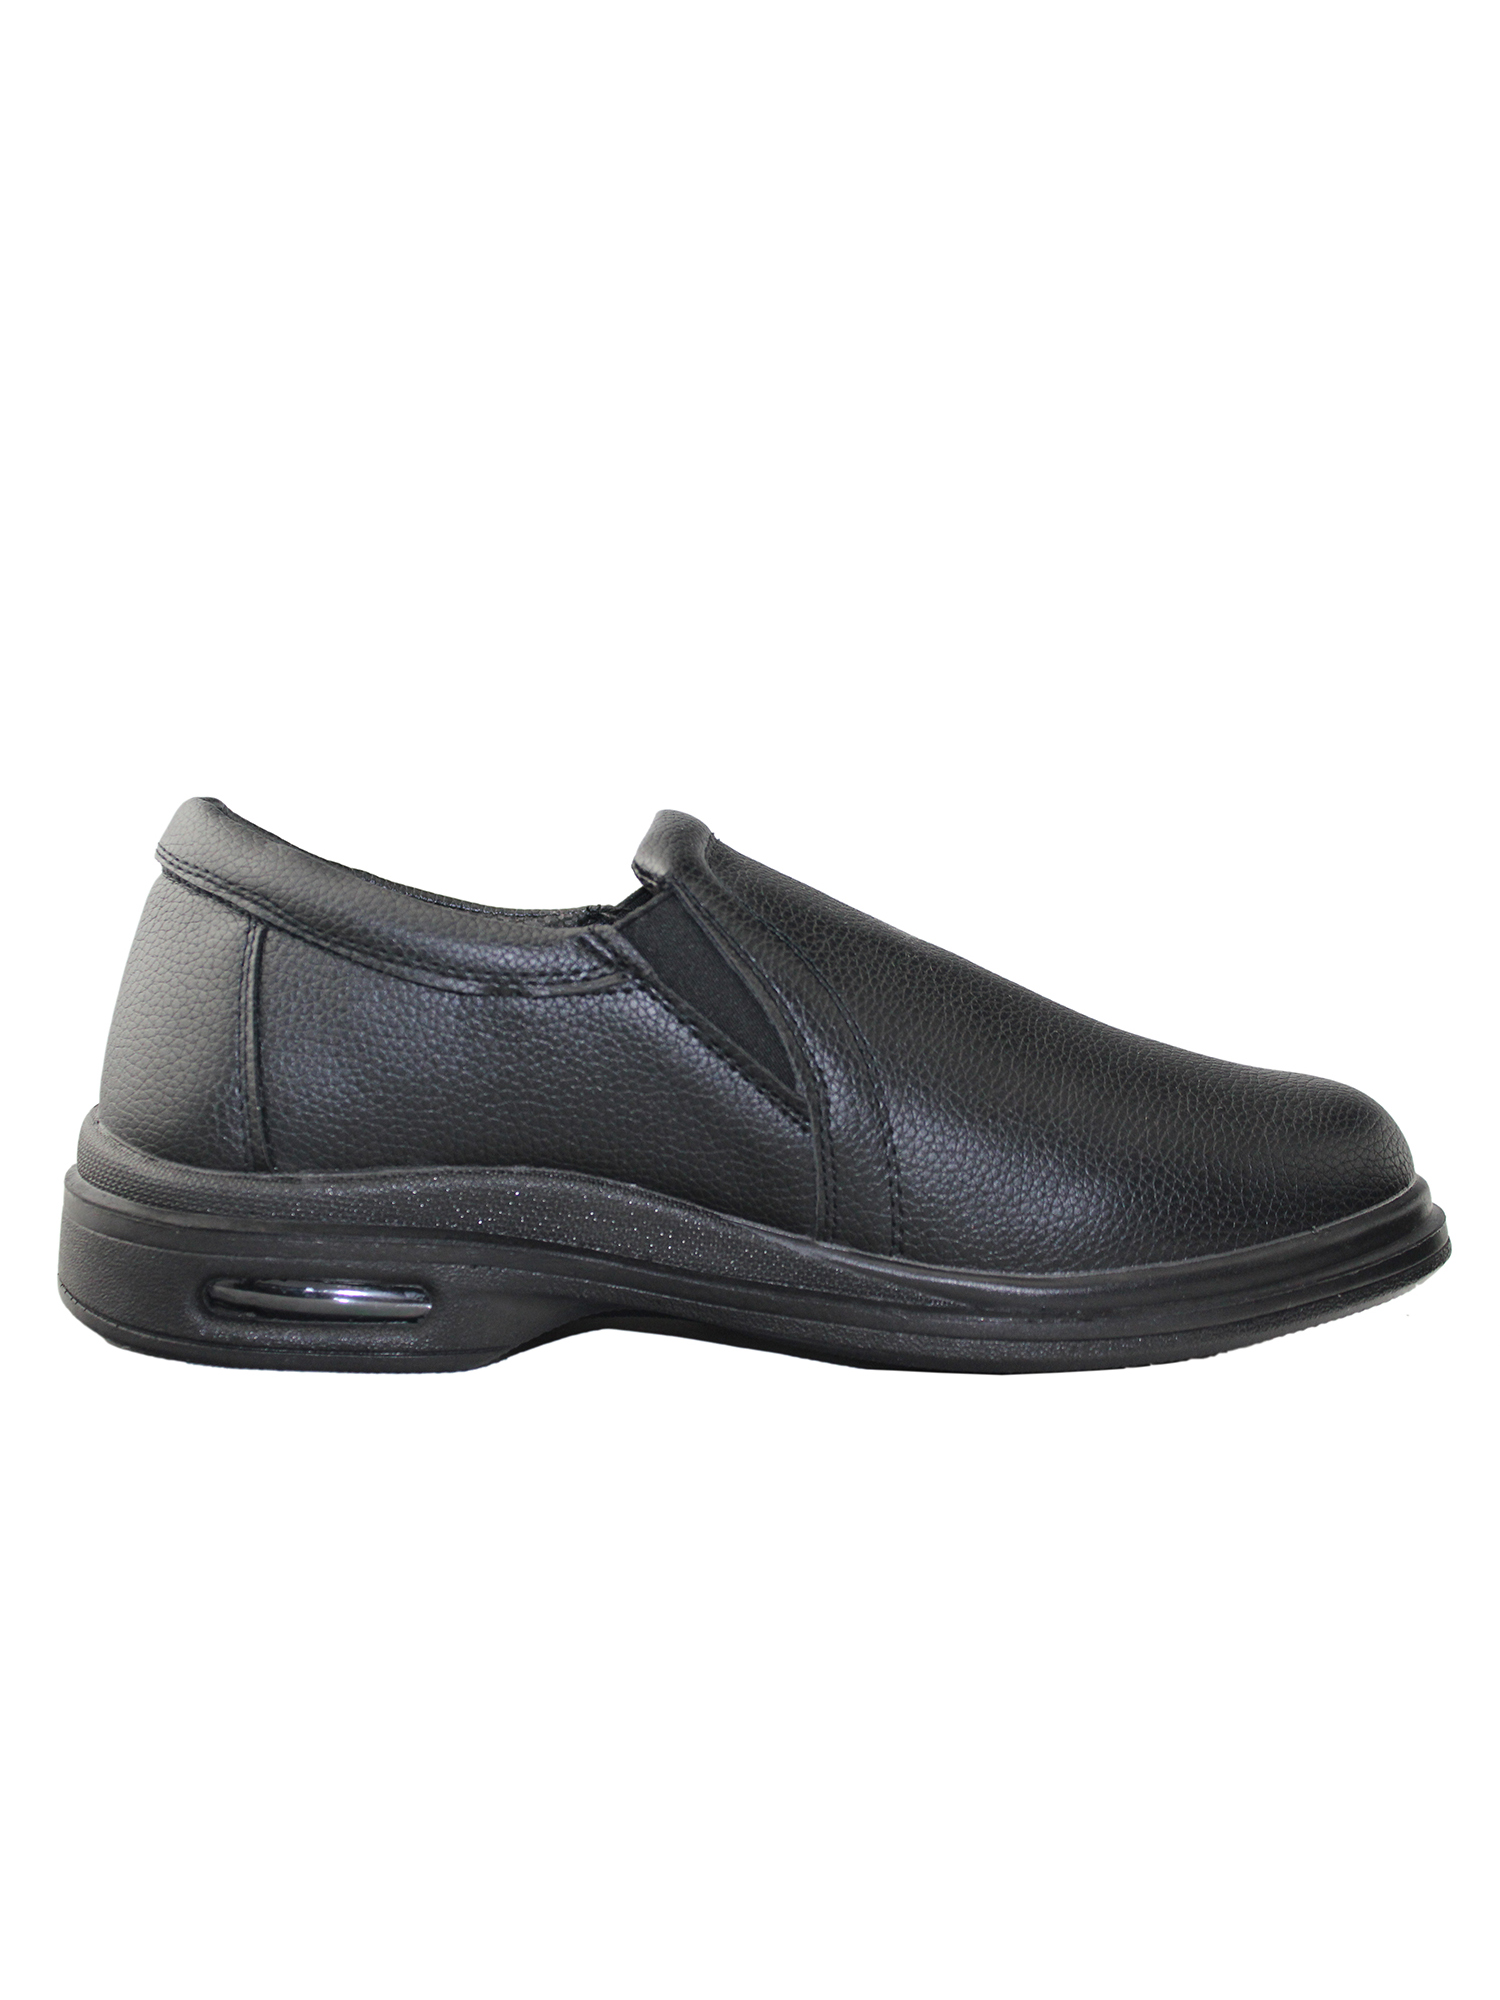 Mens Lightweight Non-Slip And Oil Resistant Shoes Autumn Winter Comfortable Air-Cushioning Casual Shoes - image 3 of 5